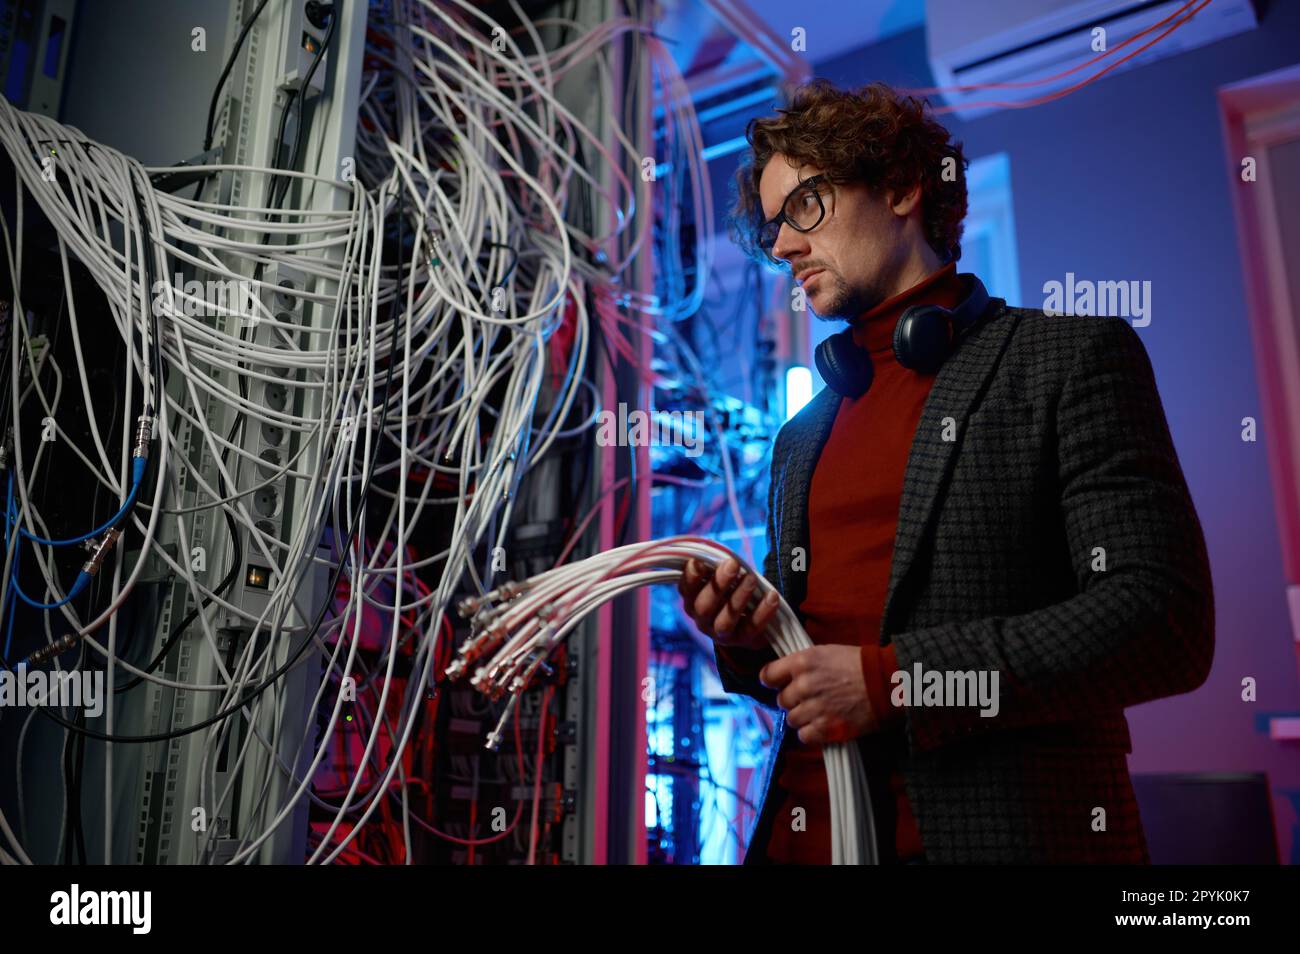 IT man with bunch of cables in hands in server room Stock Photo